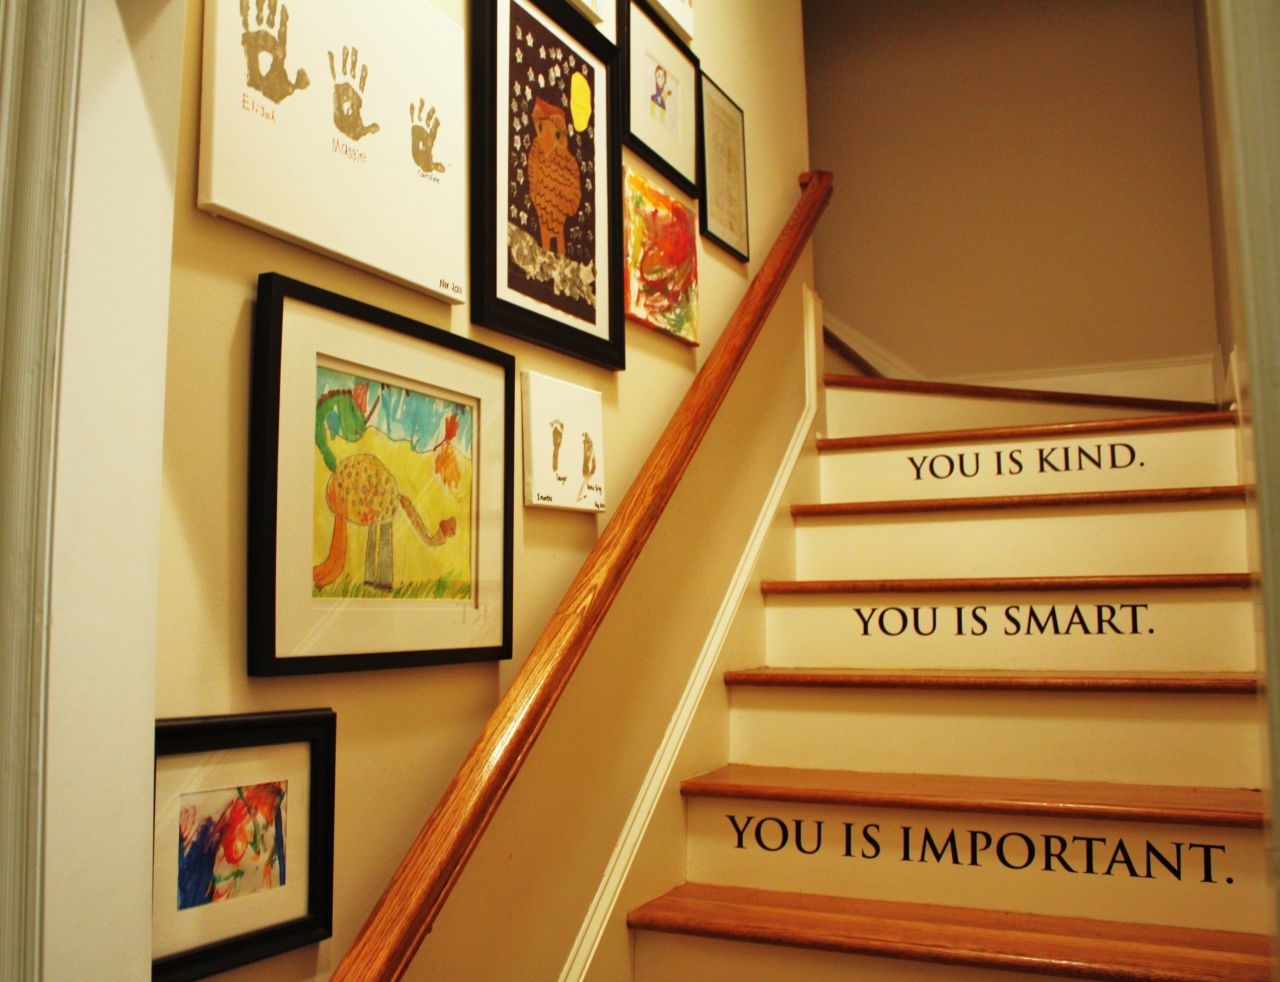 <a href="http://ireport.cnn.com/docs/DOC-991017">Emily Clark's </a>home in Charlotte, North Carolina, has a back staircase which she decorated in a way that communicates love and pride to her children.